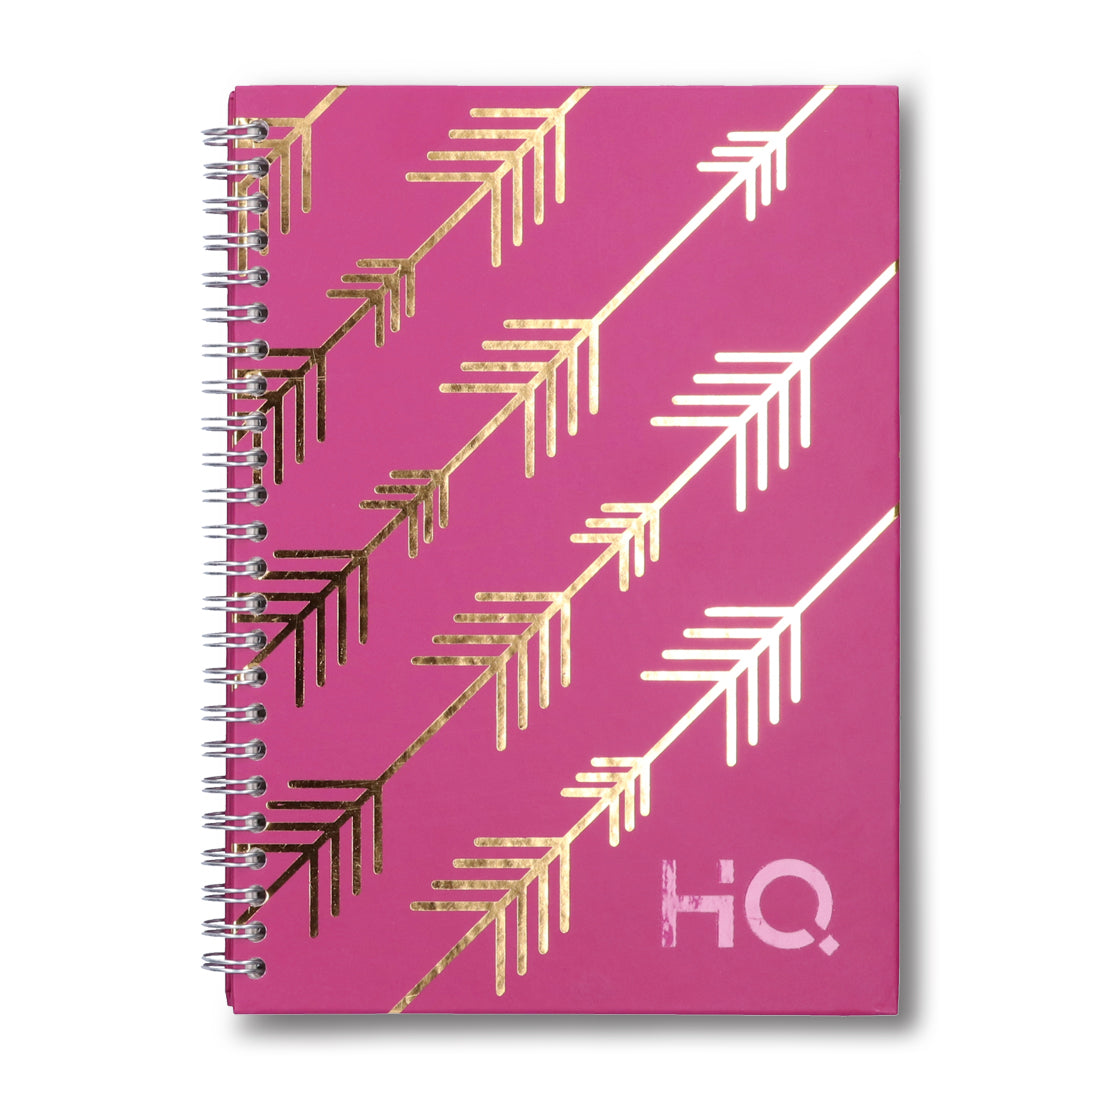 Navneet HQ | Hard Cover Notebook - Corporate Edge (Burgandy) for Office and Professional Use | Wiro Bound and Foil Stamping | Single Line | A5 Size - 21 cm x 14.8 cm | 192 Pages